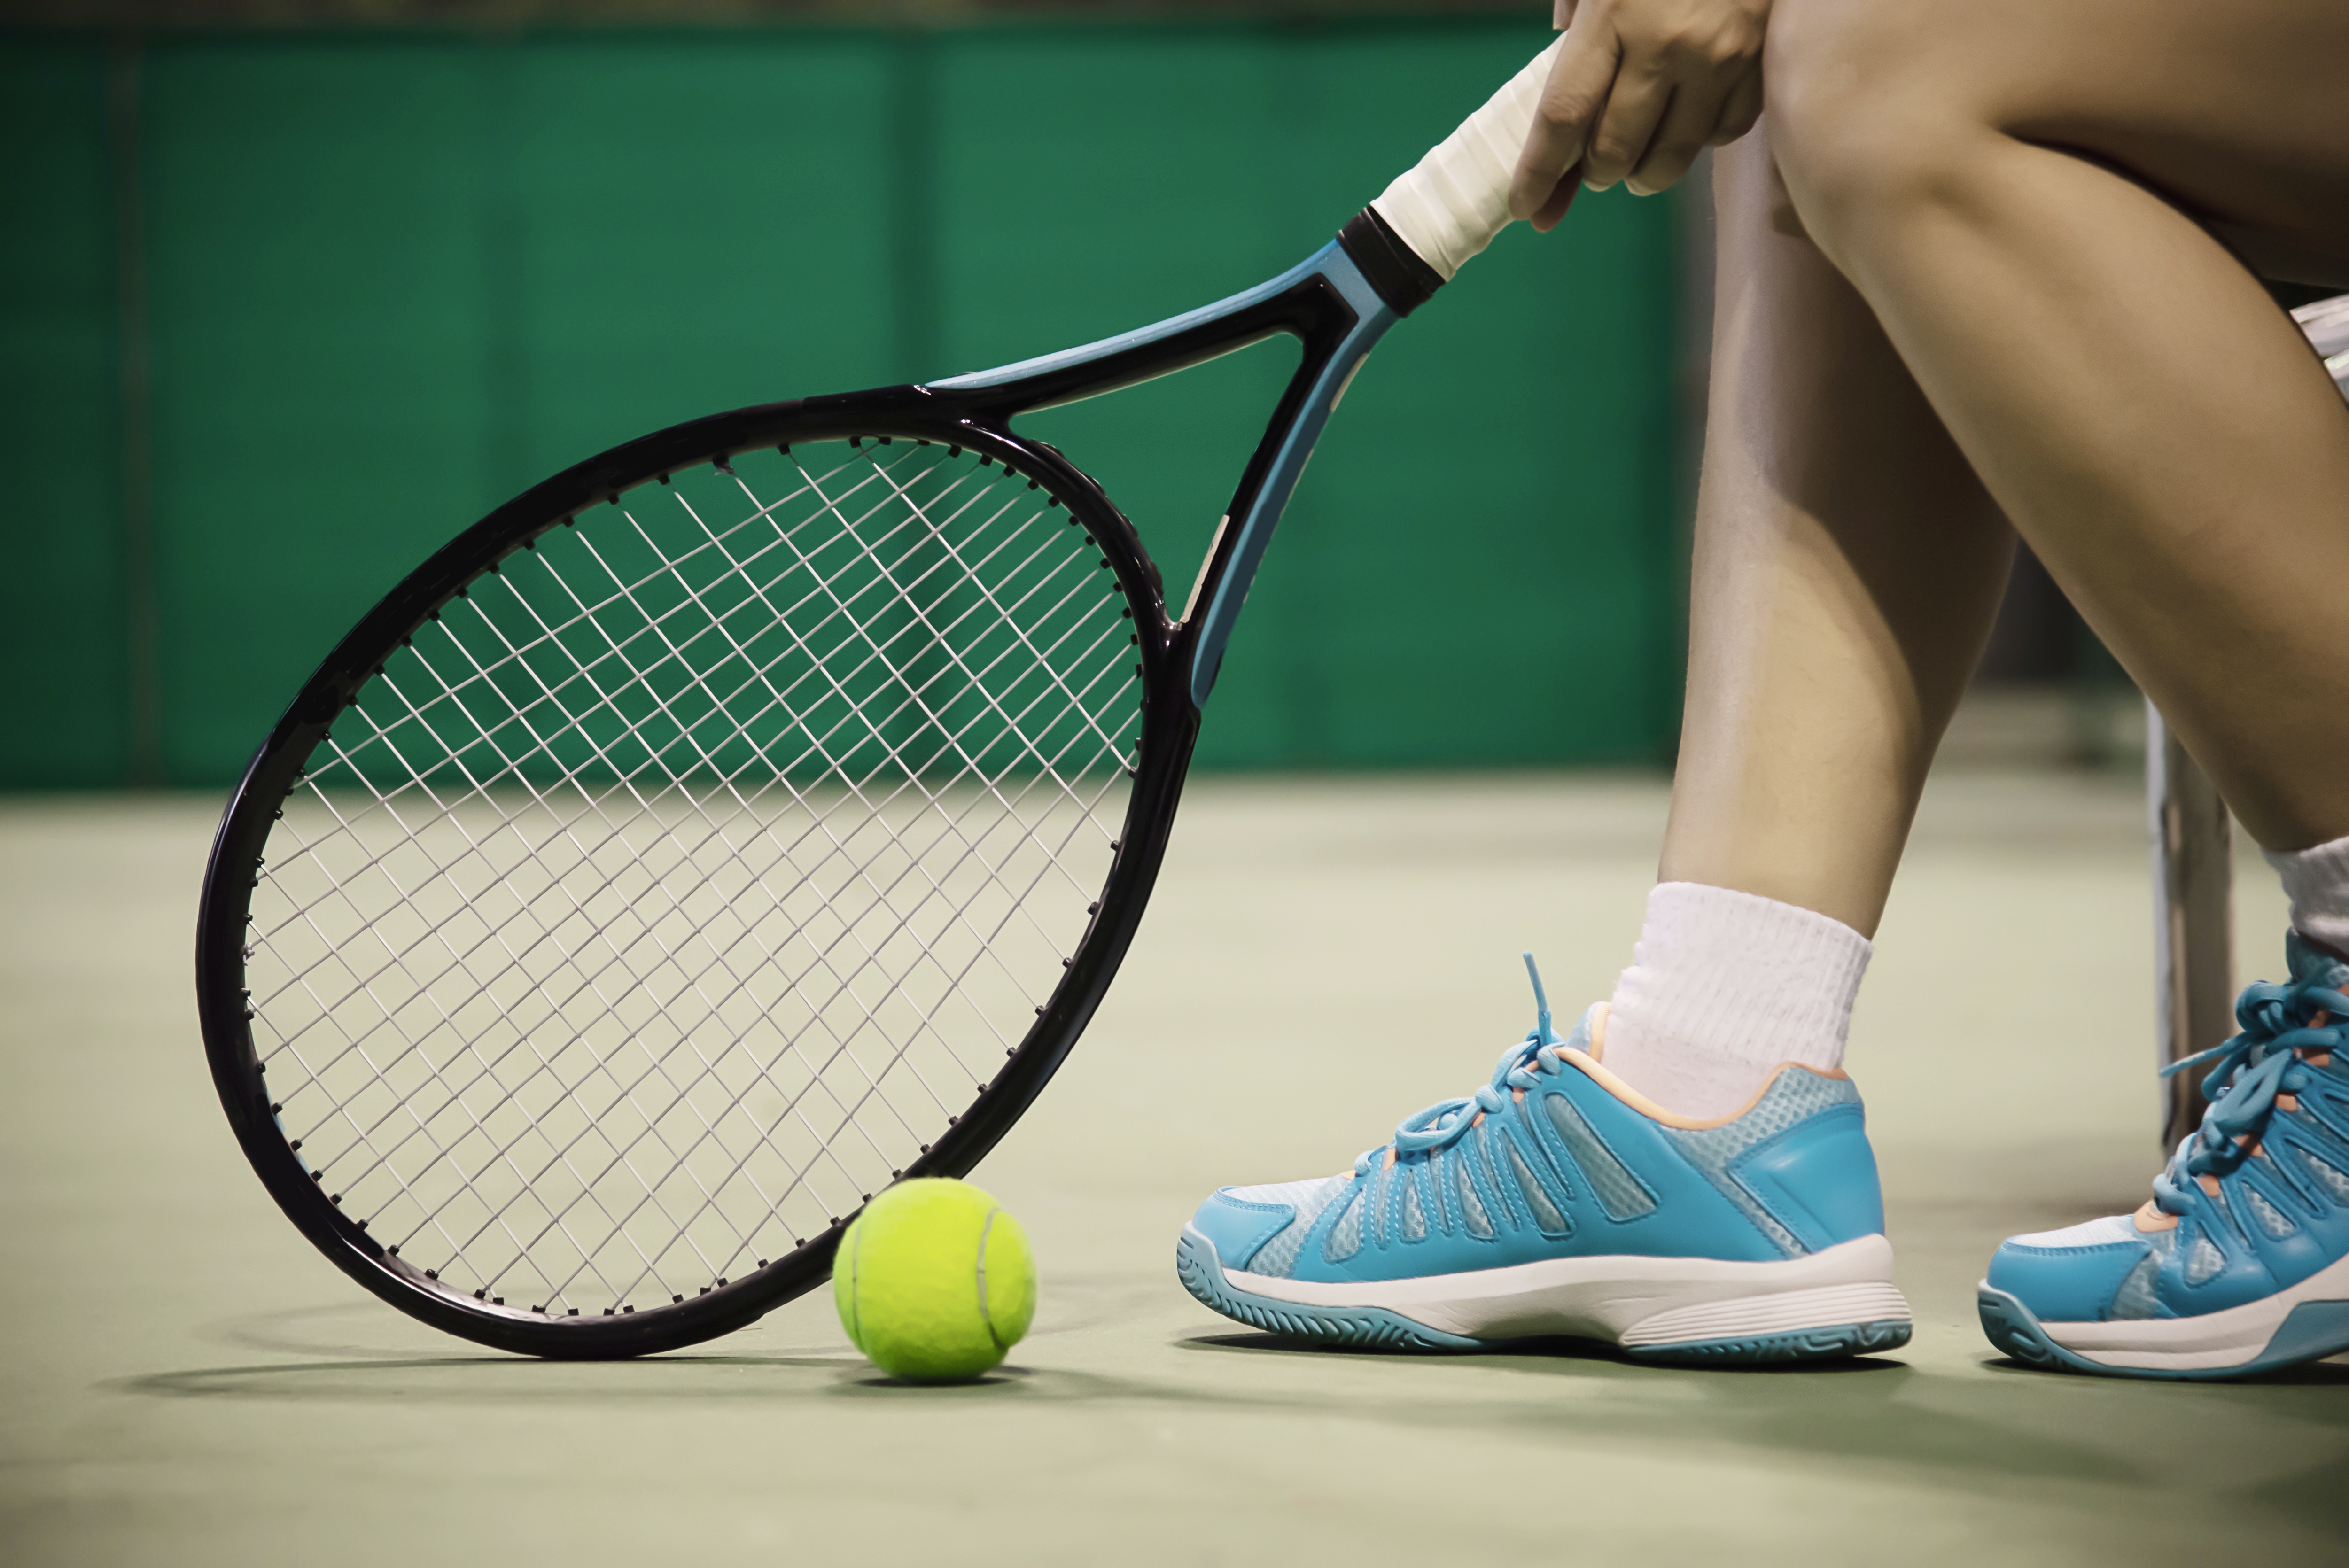 All that slipping and sliding on tennis courts prevents injuries: A ...